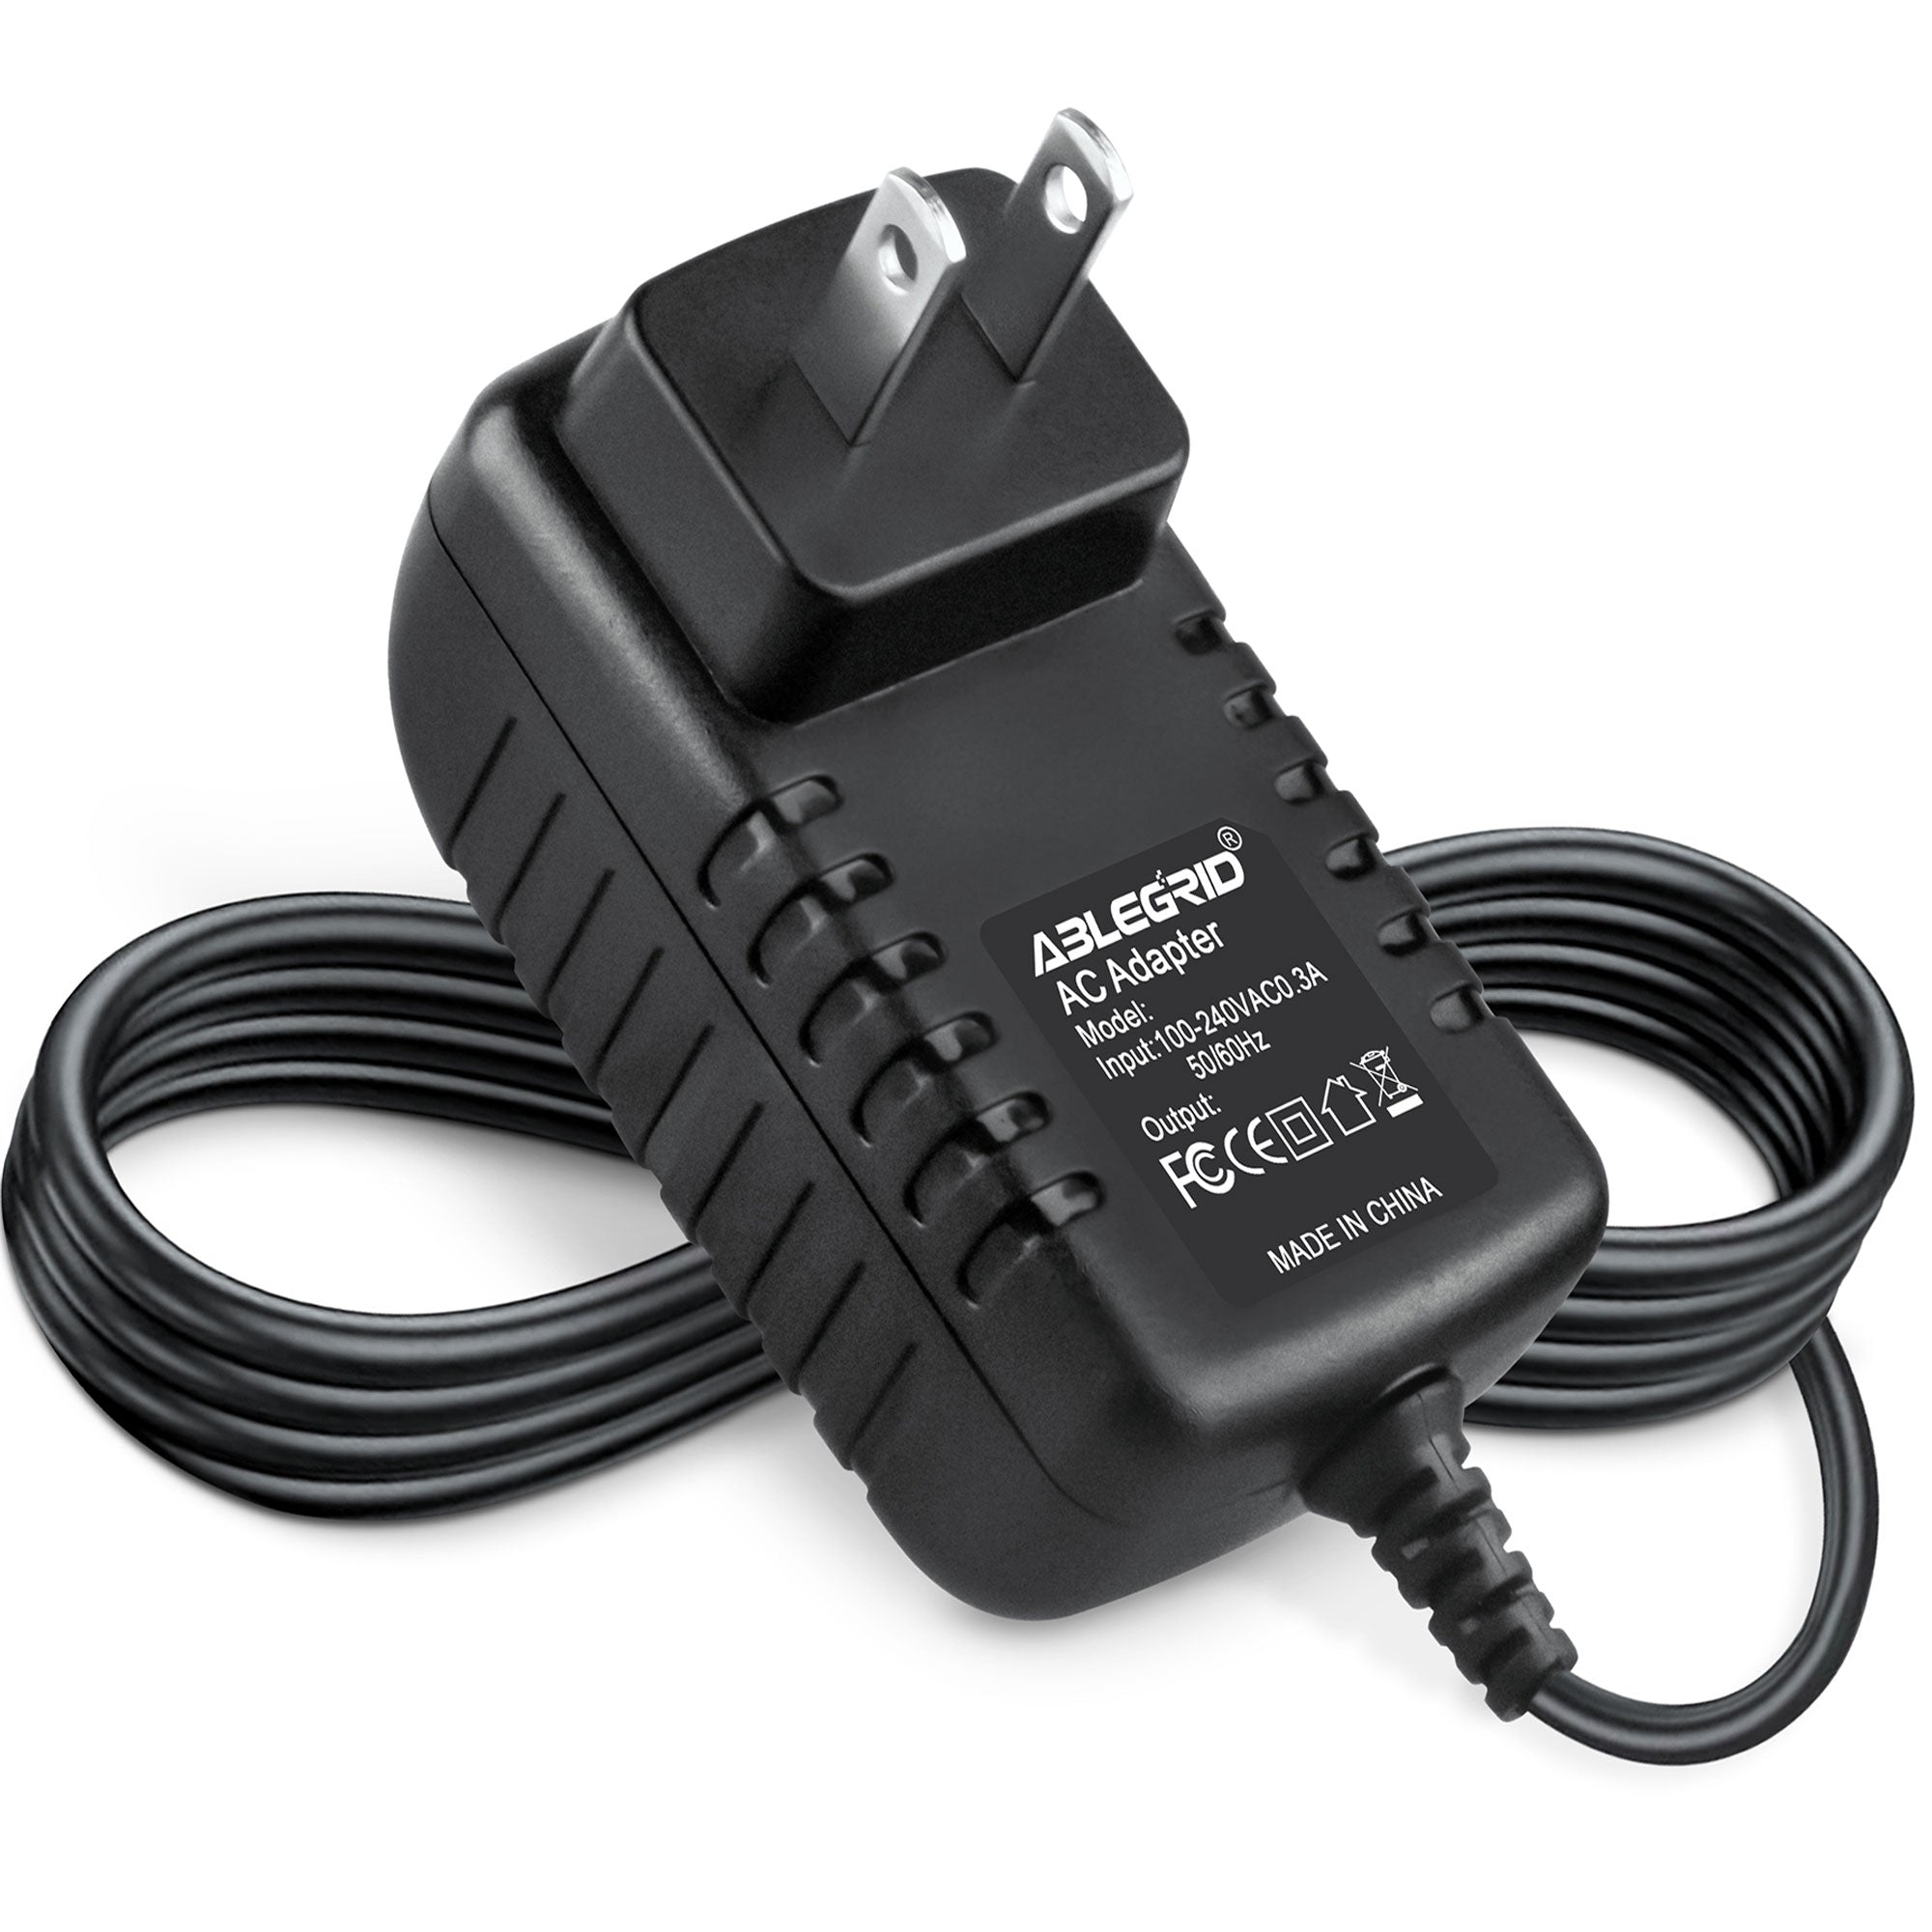 AbleGrid AC-DC Adapter for JobSite IR-CB2 Two-Zone IR Connecting Block Power Supply Cord Cable PS Wall Home Charger Input: 100 - 240 VAC 50/60Hz Worldwide Voltage Use Mains PSU